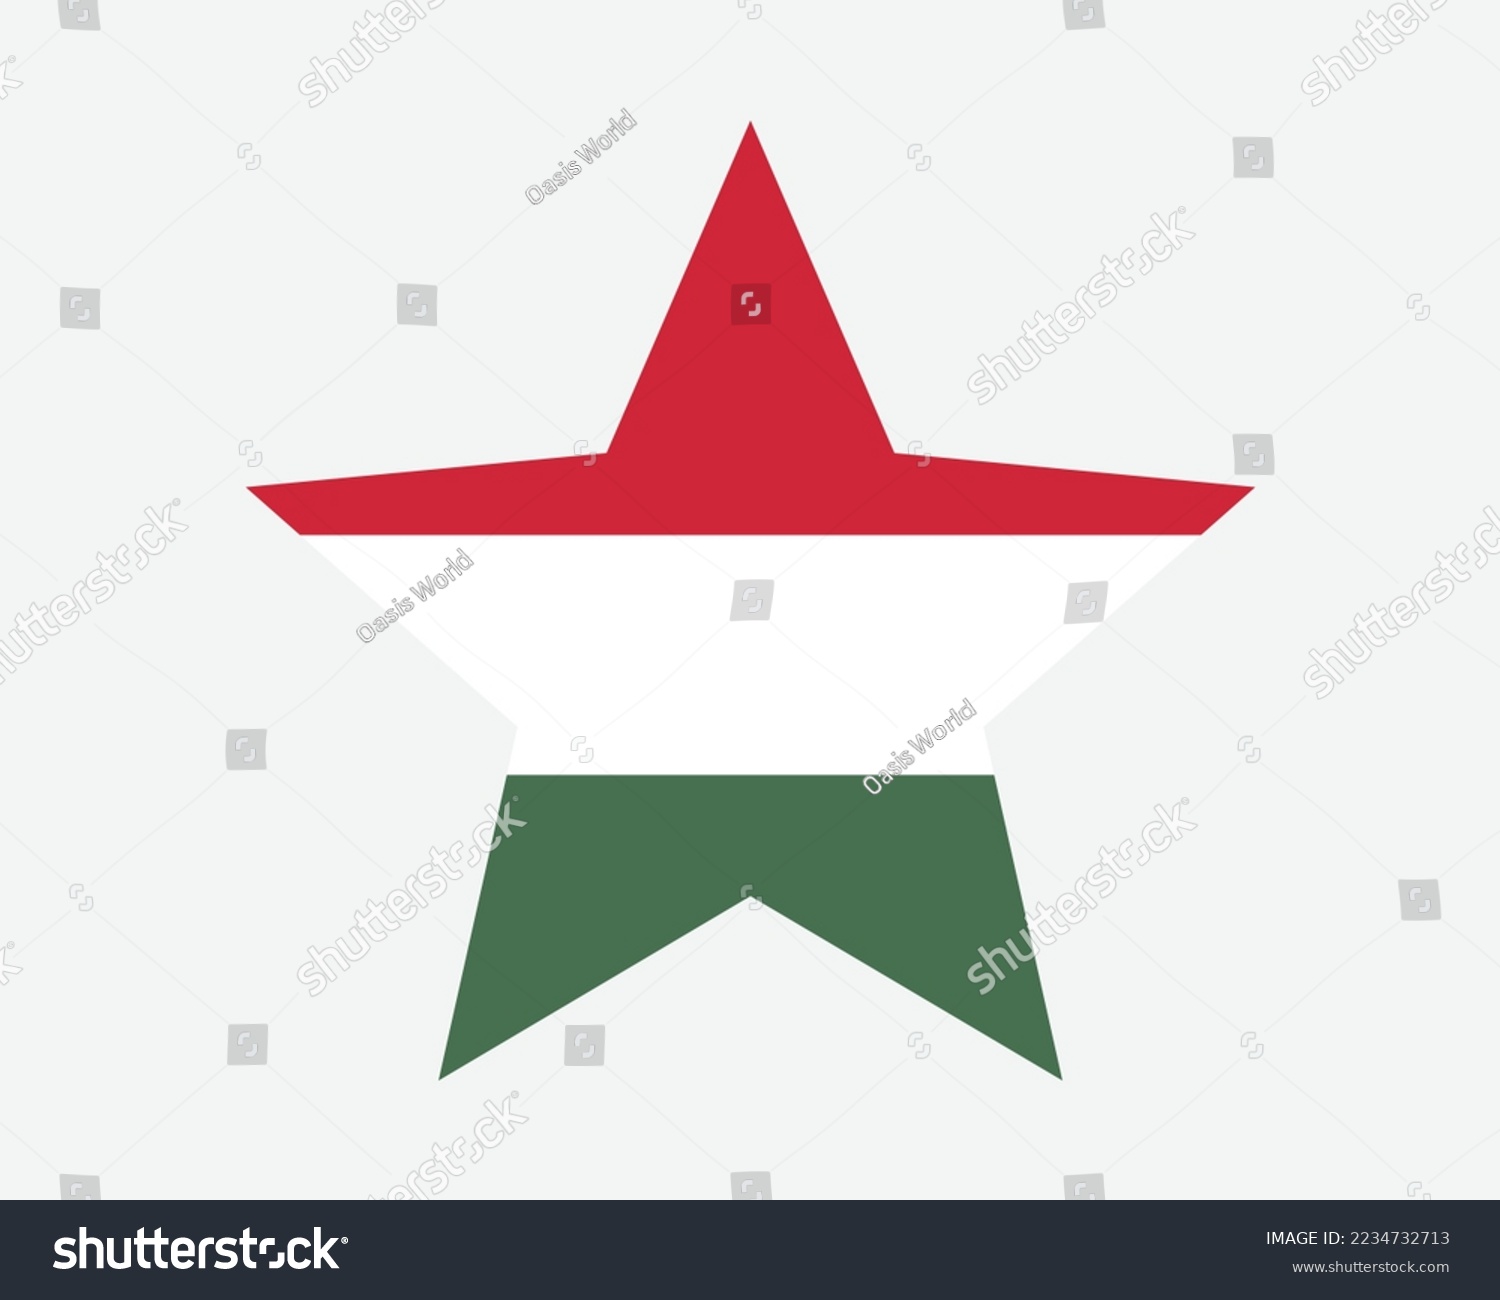 SVG of Hungary Star Flag. Hungarian Star Shape Flag. Country National Banner Icon Symbol Vector Flat Artwork Graphic Illustration svg